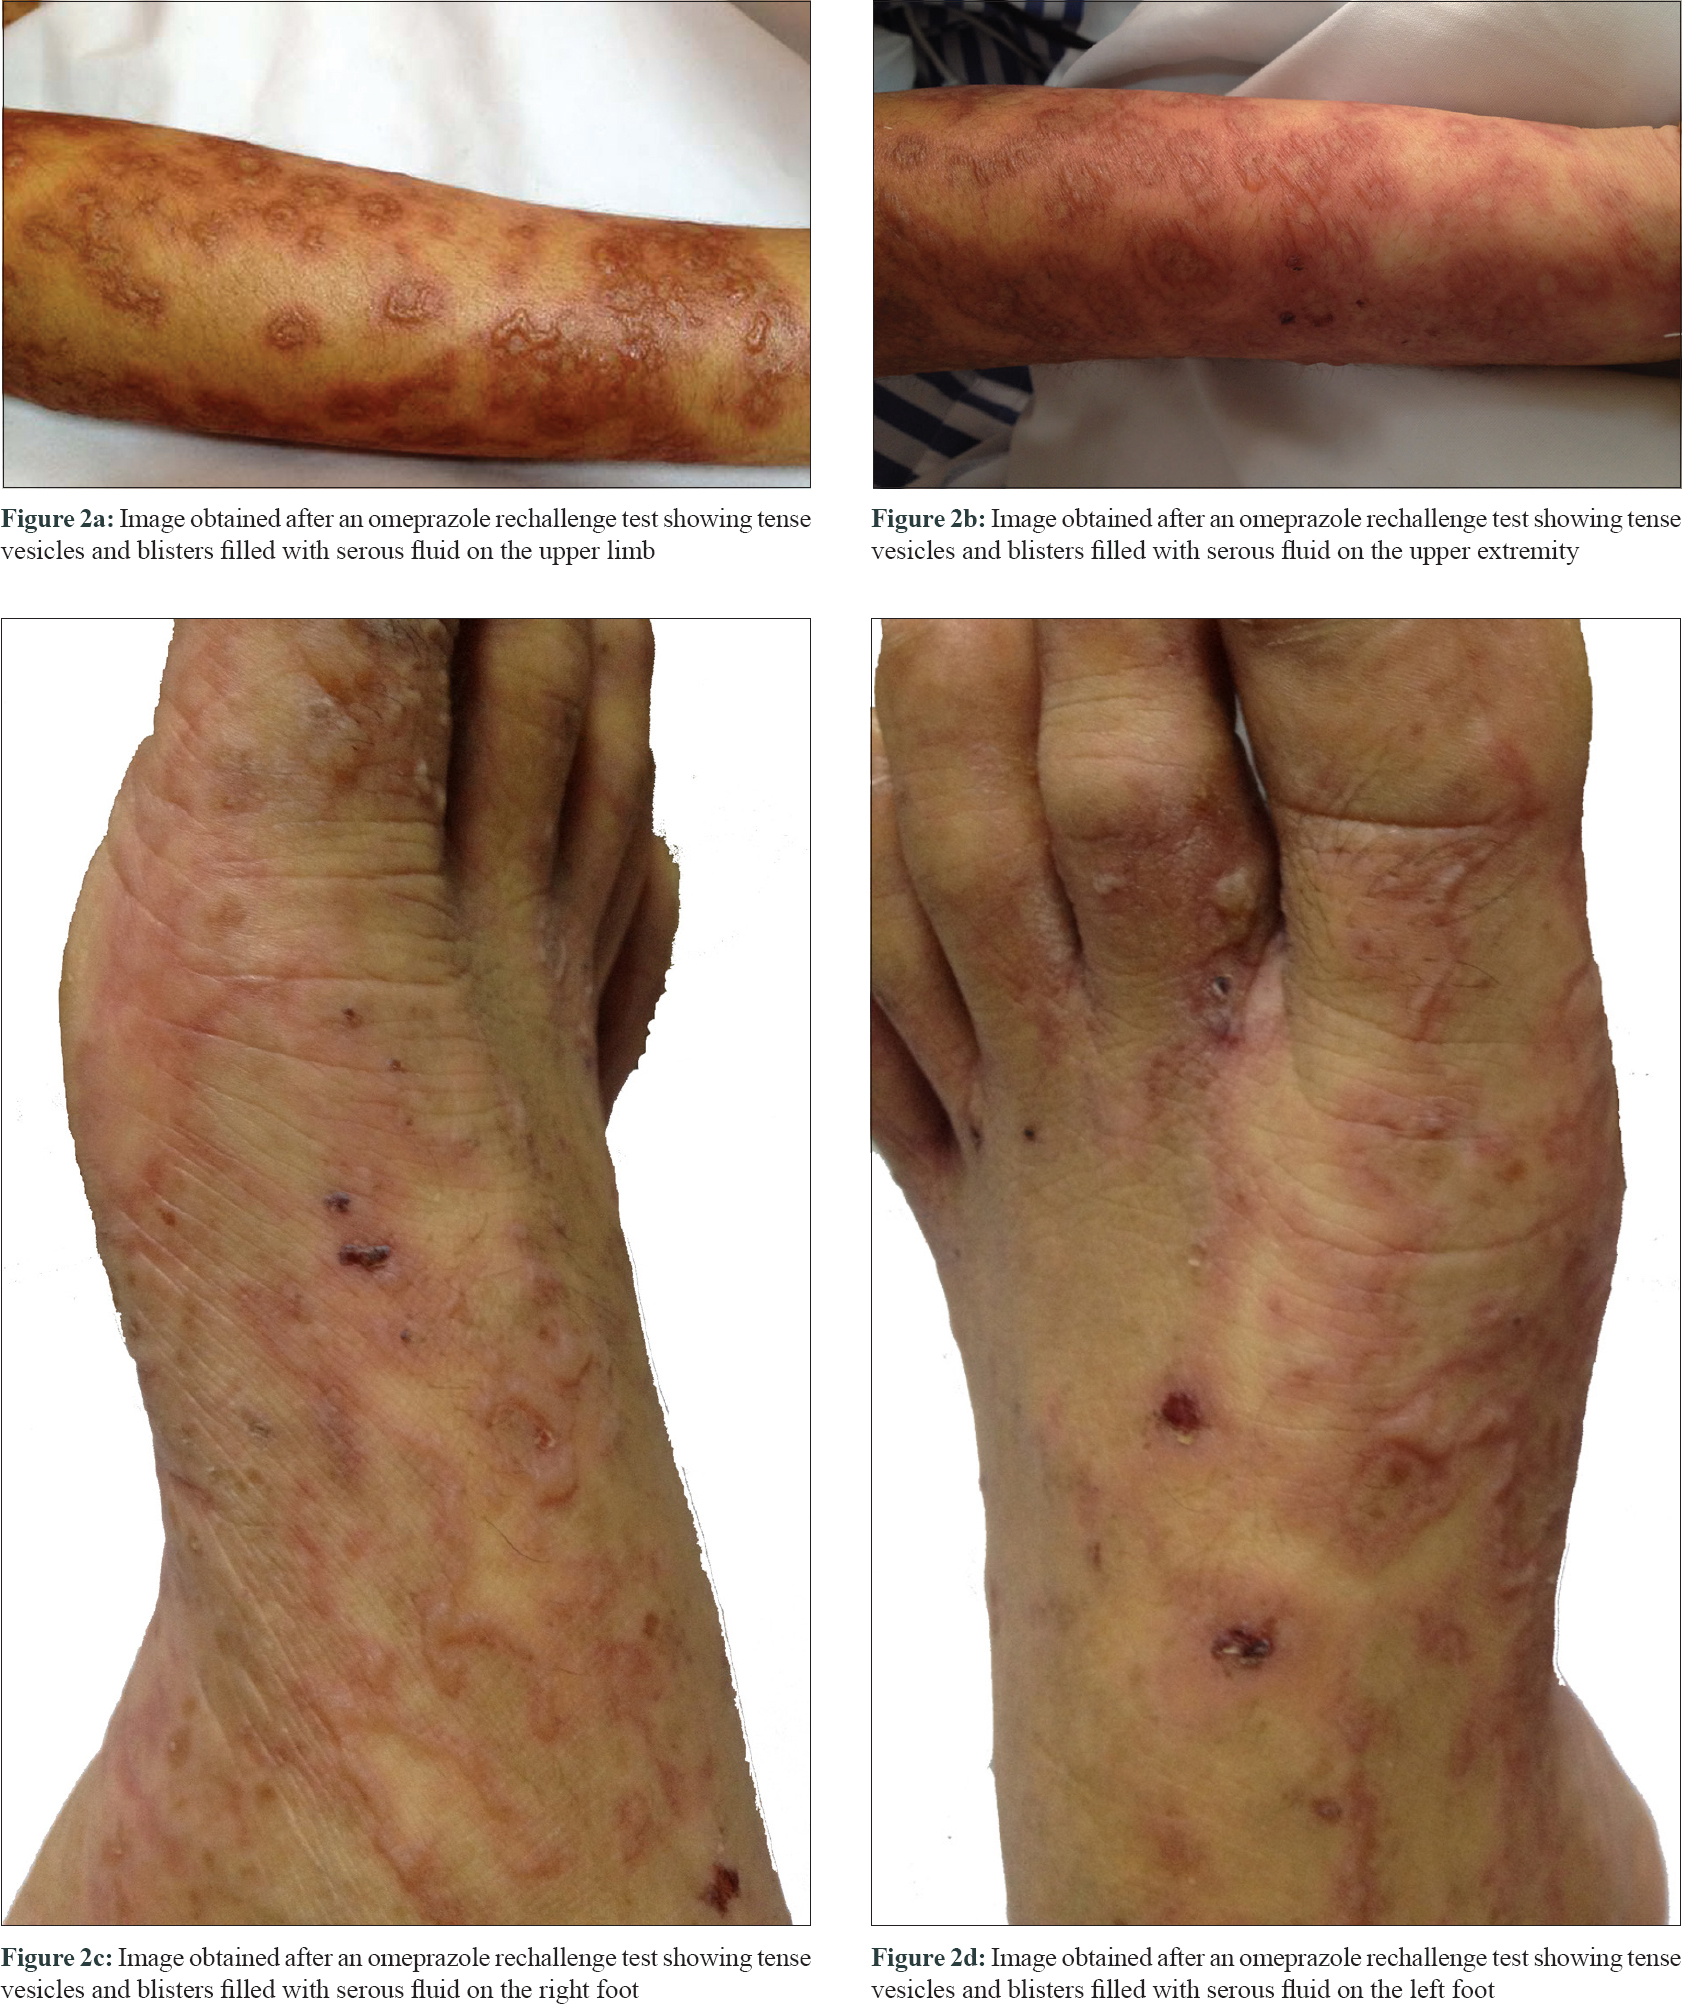 Clinical photograph of linear IgA bullous dermatosis showing tense